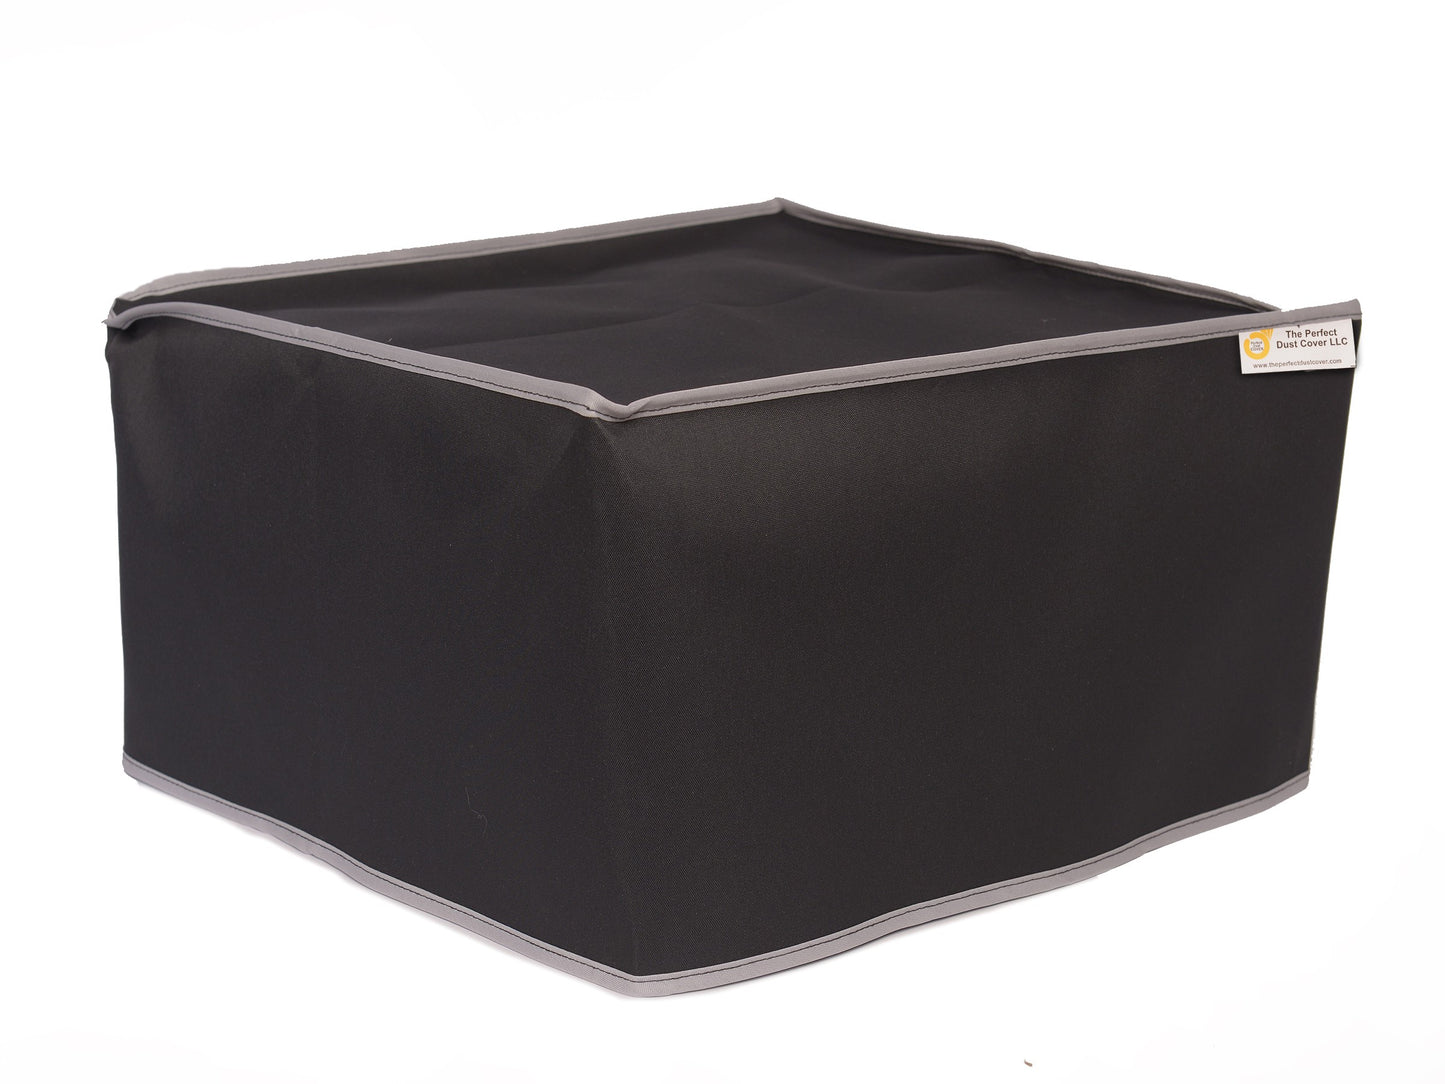 The Perfect Dust Cover, Black Nylon Cover Compatible with HP LaserJet Pro MFP M28w HP LaserJet Pro MFP M29w Wireless Black and White Printers, Anti-Static and Waterproof Dust Cover Dimensions 14.2''W x 10.4''D x 7.8''H by The Perfect Dust Cover LLC